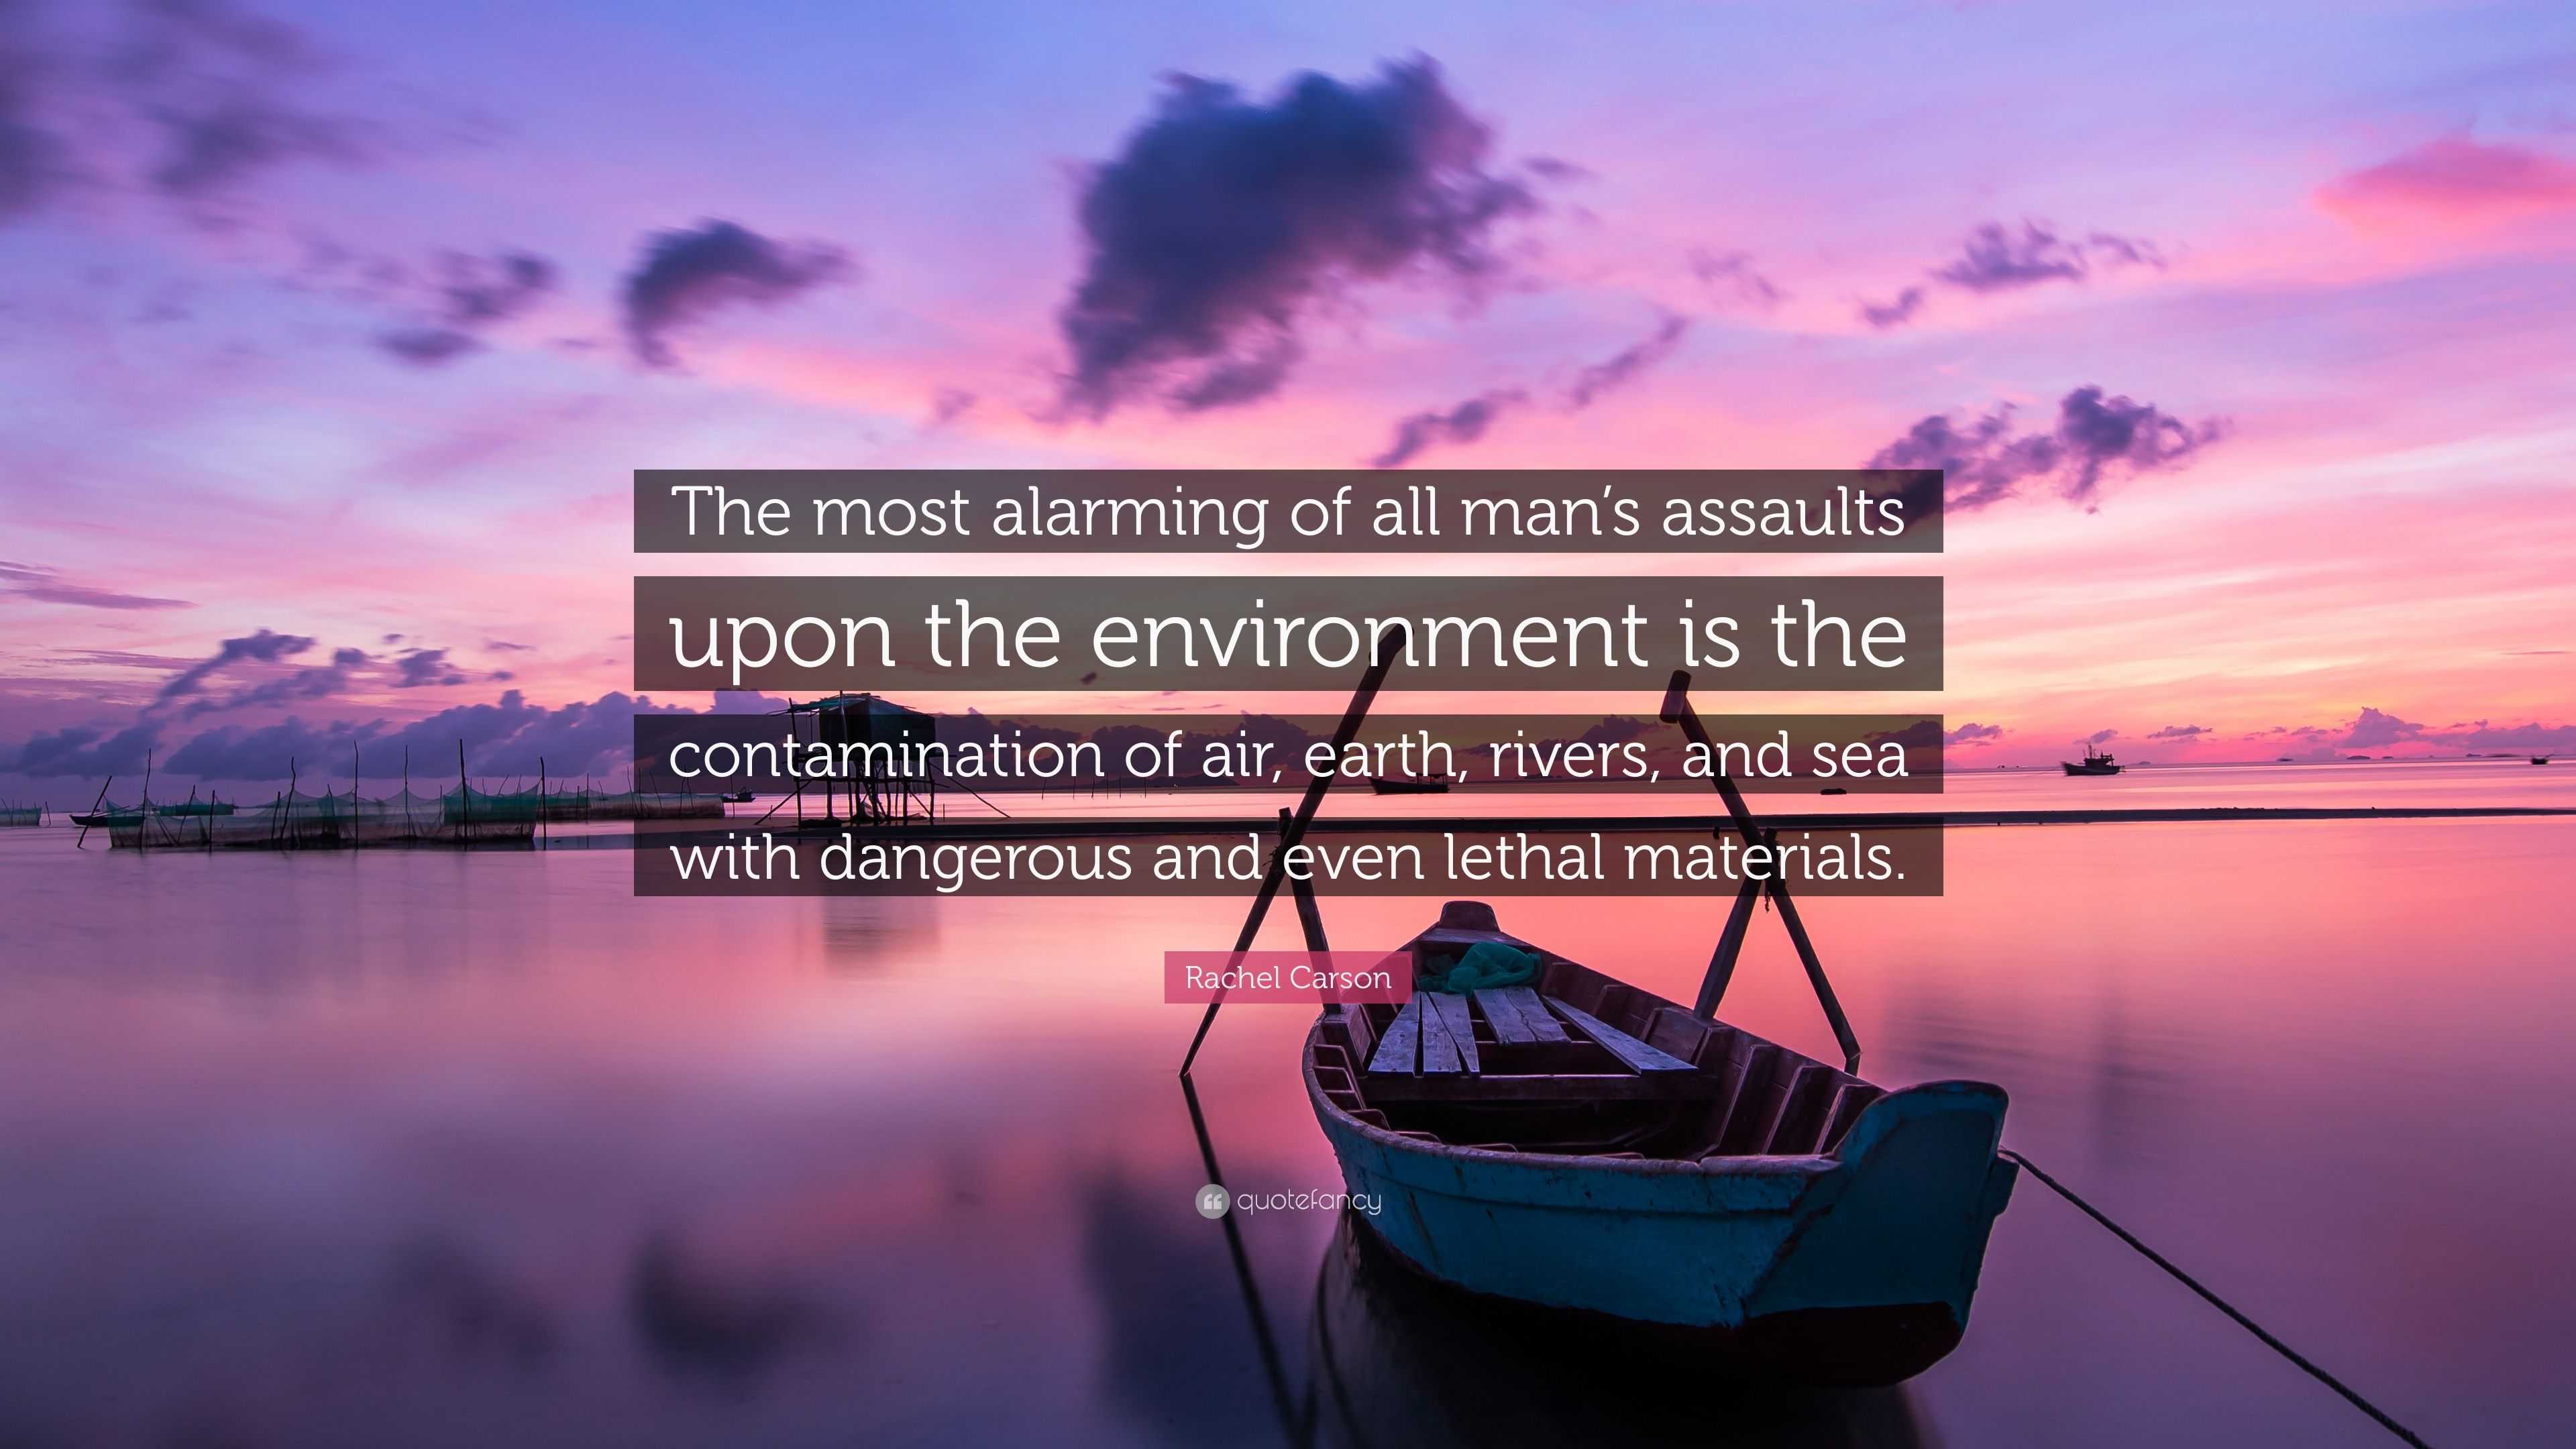 Rachel Carson Quote: “The most alarming of all man’s assaults upon the